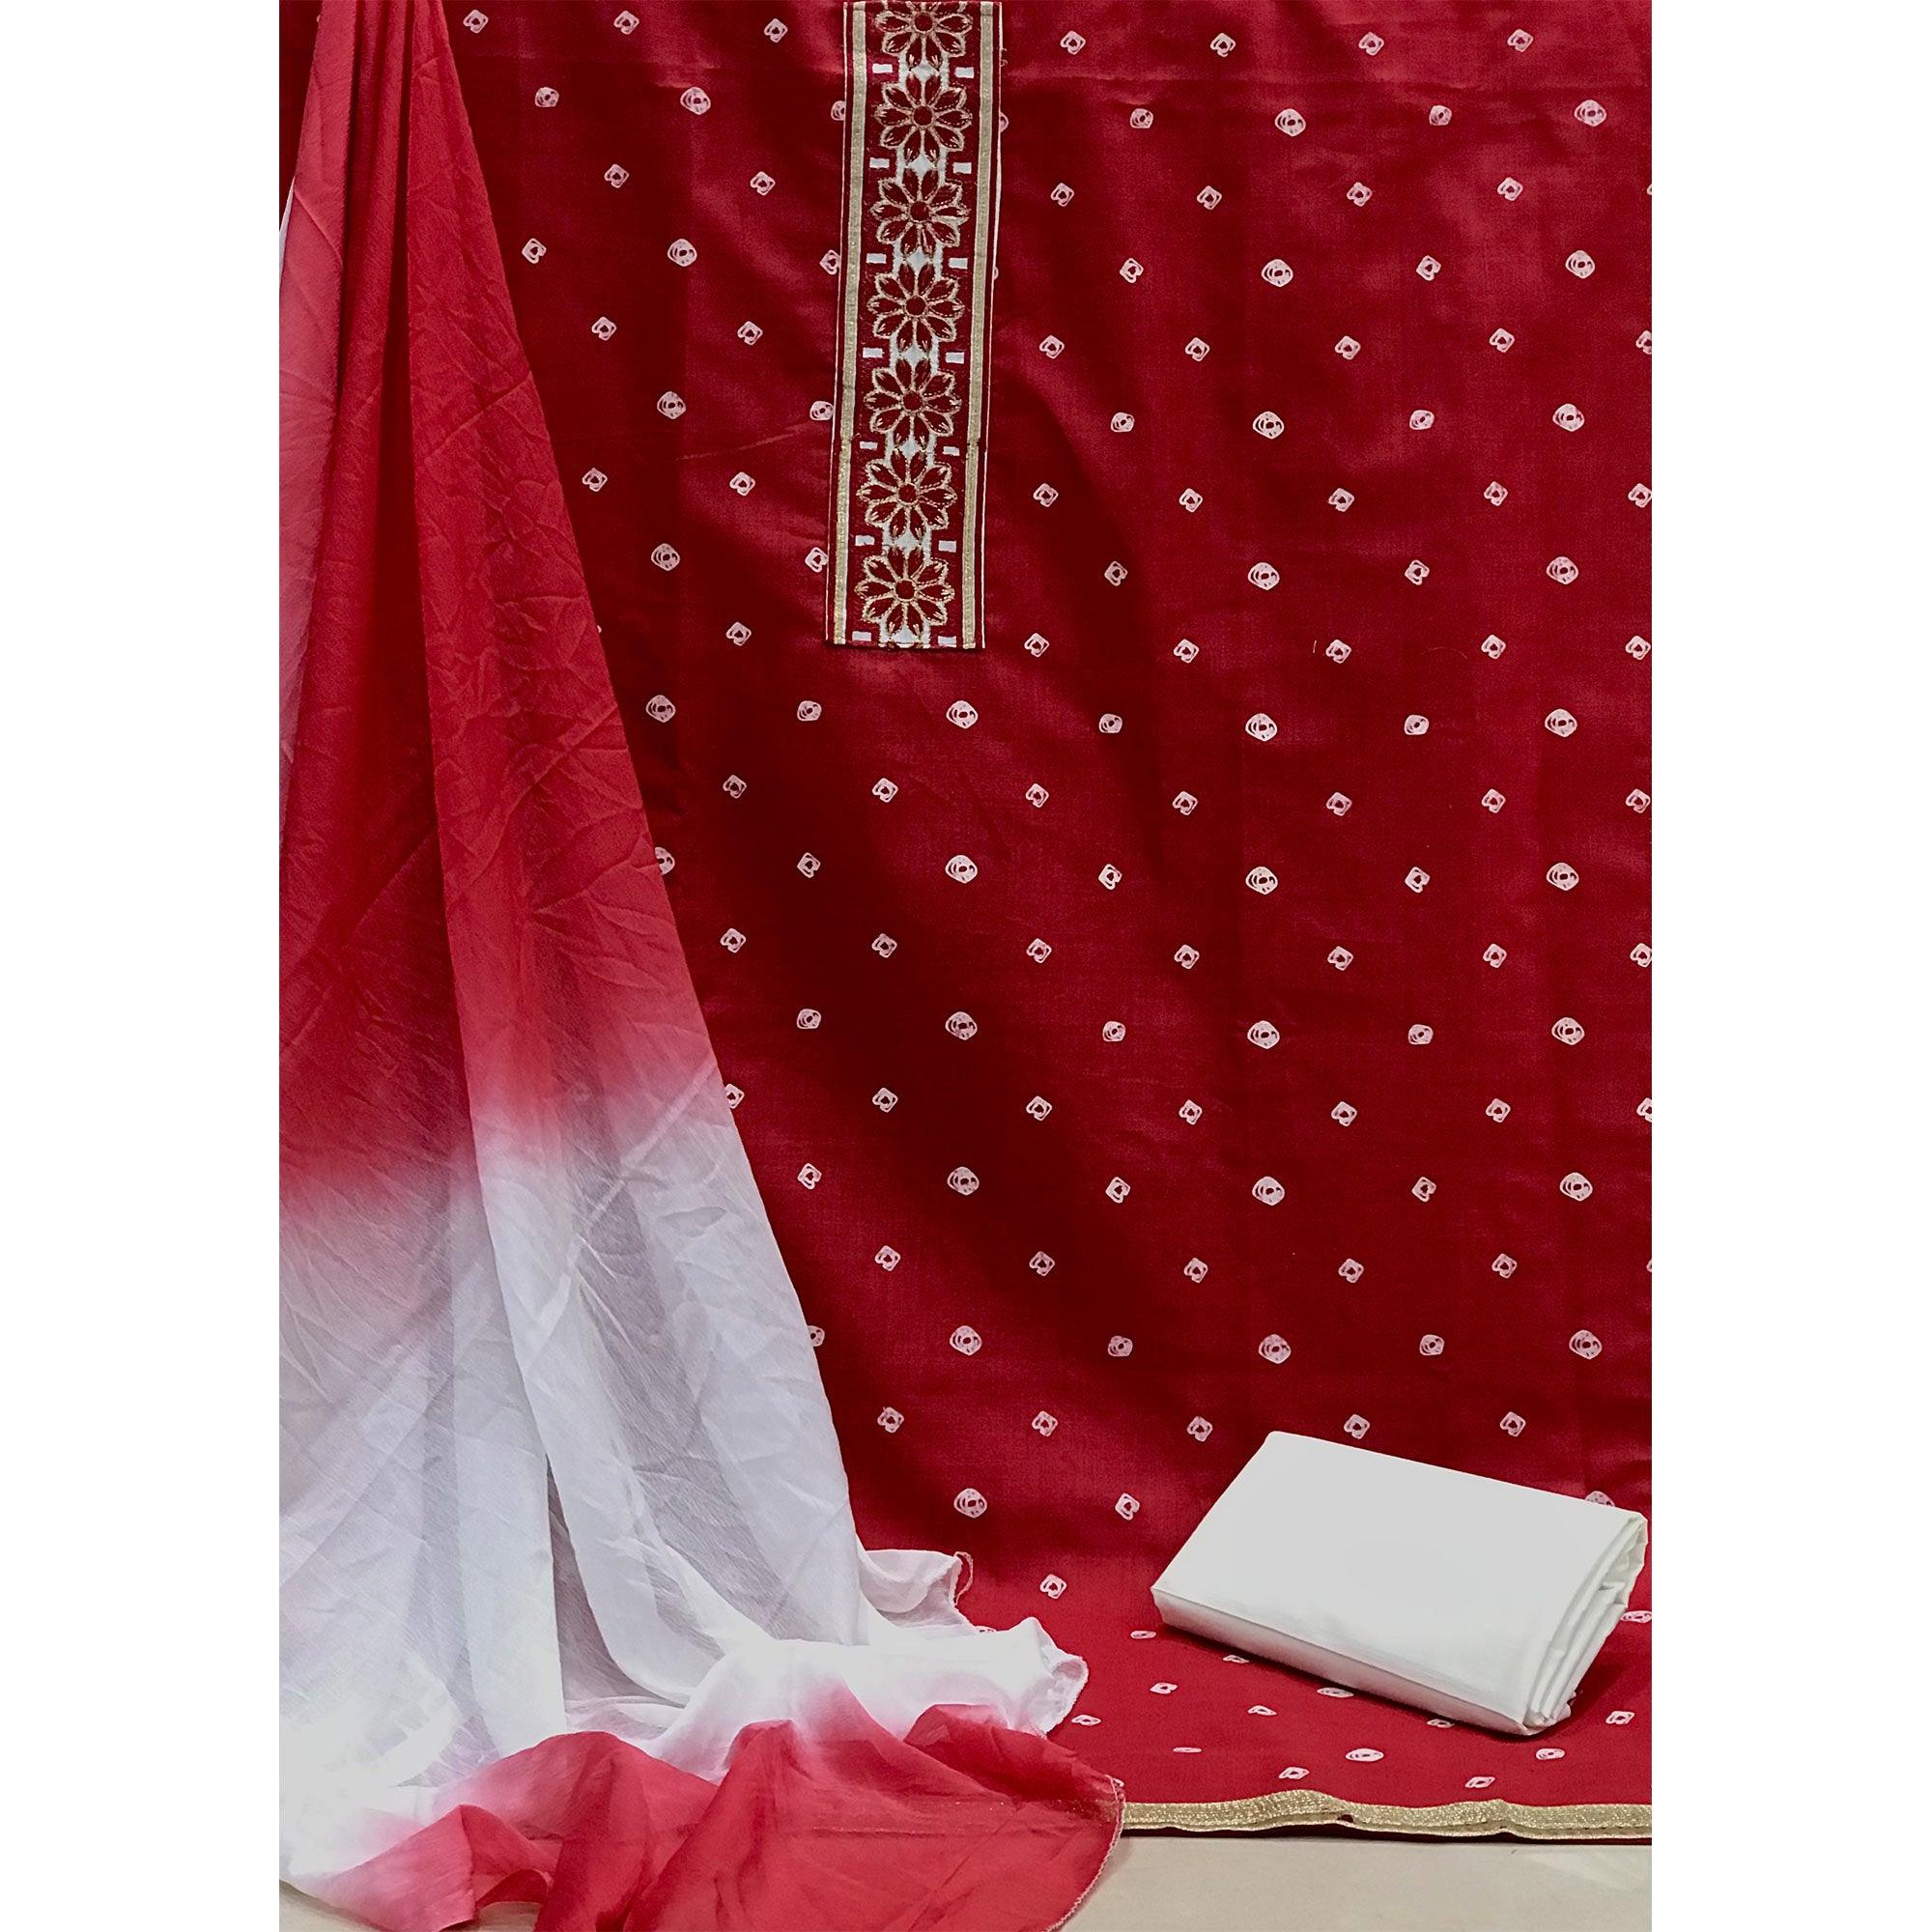 Red Casual Wear Bandhani Printed Cotton Dress Material - Peachmode